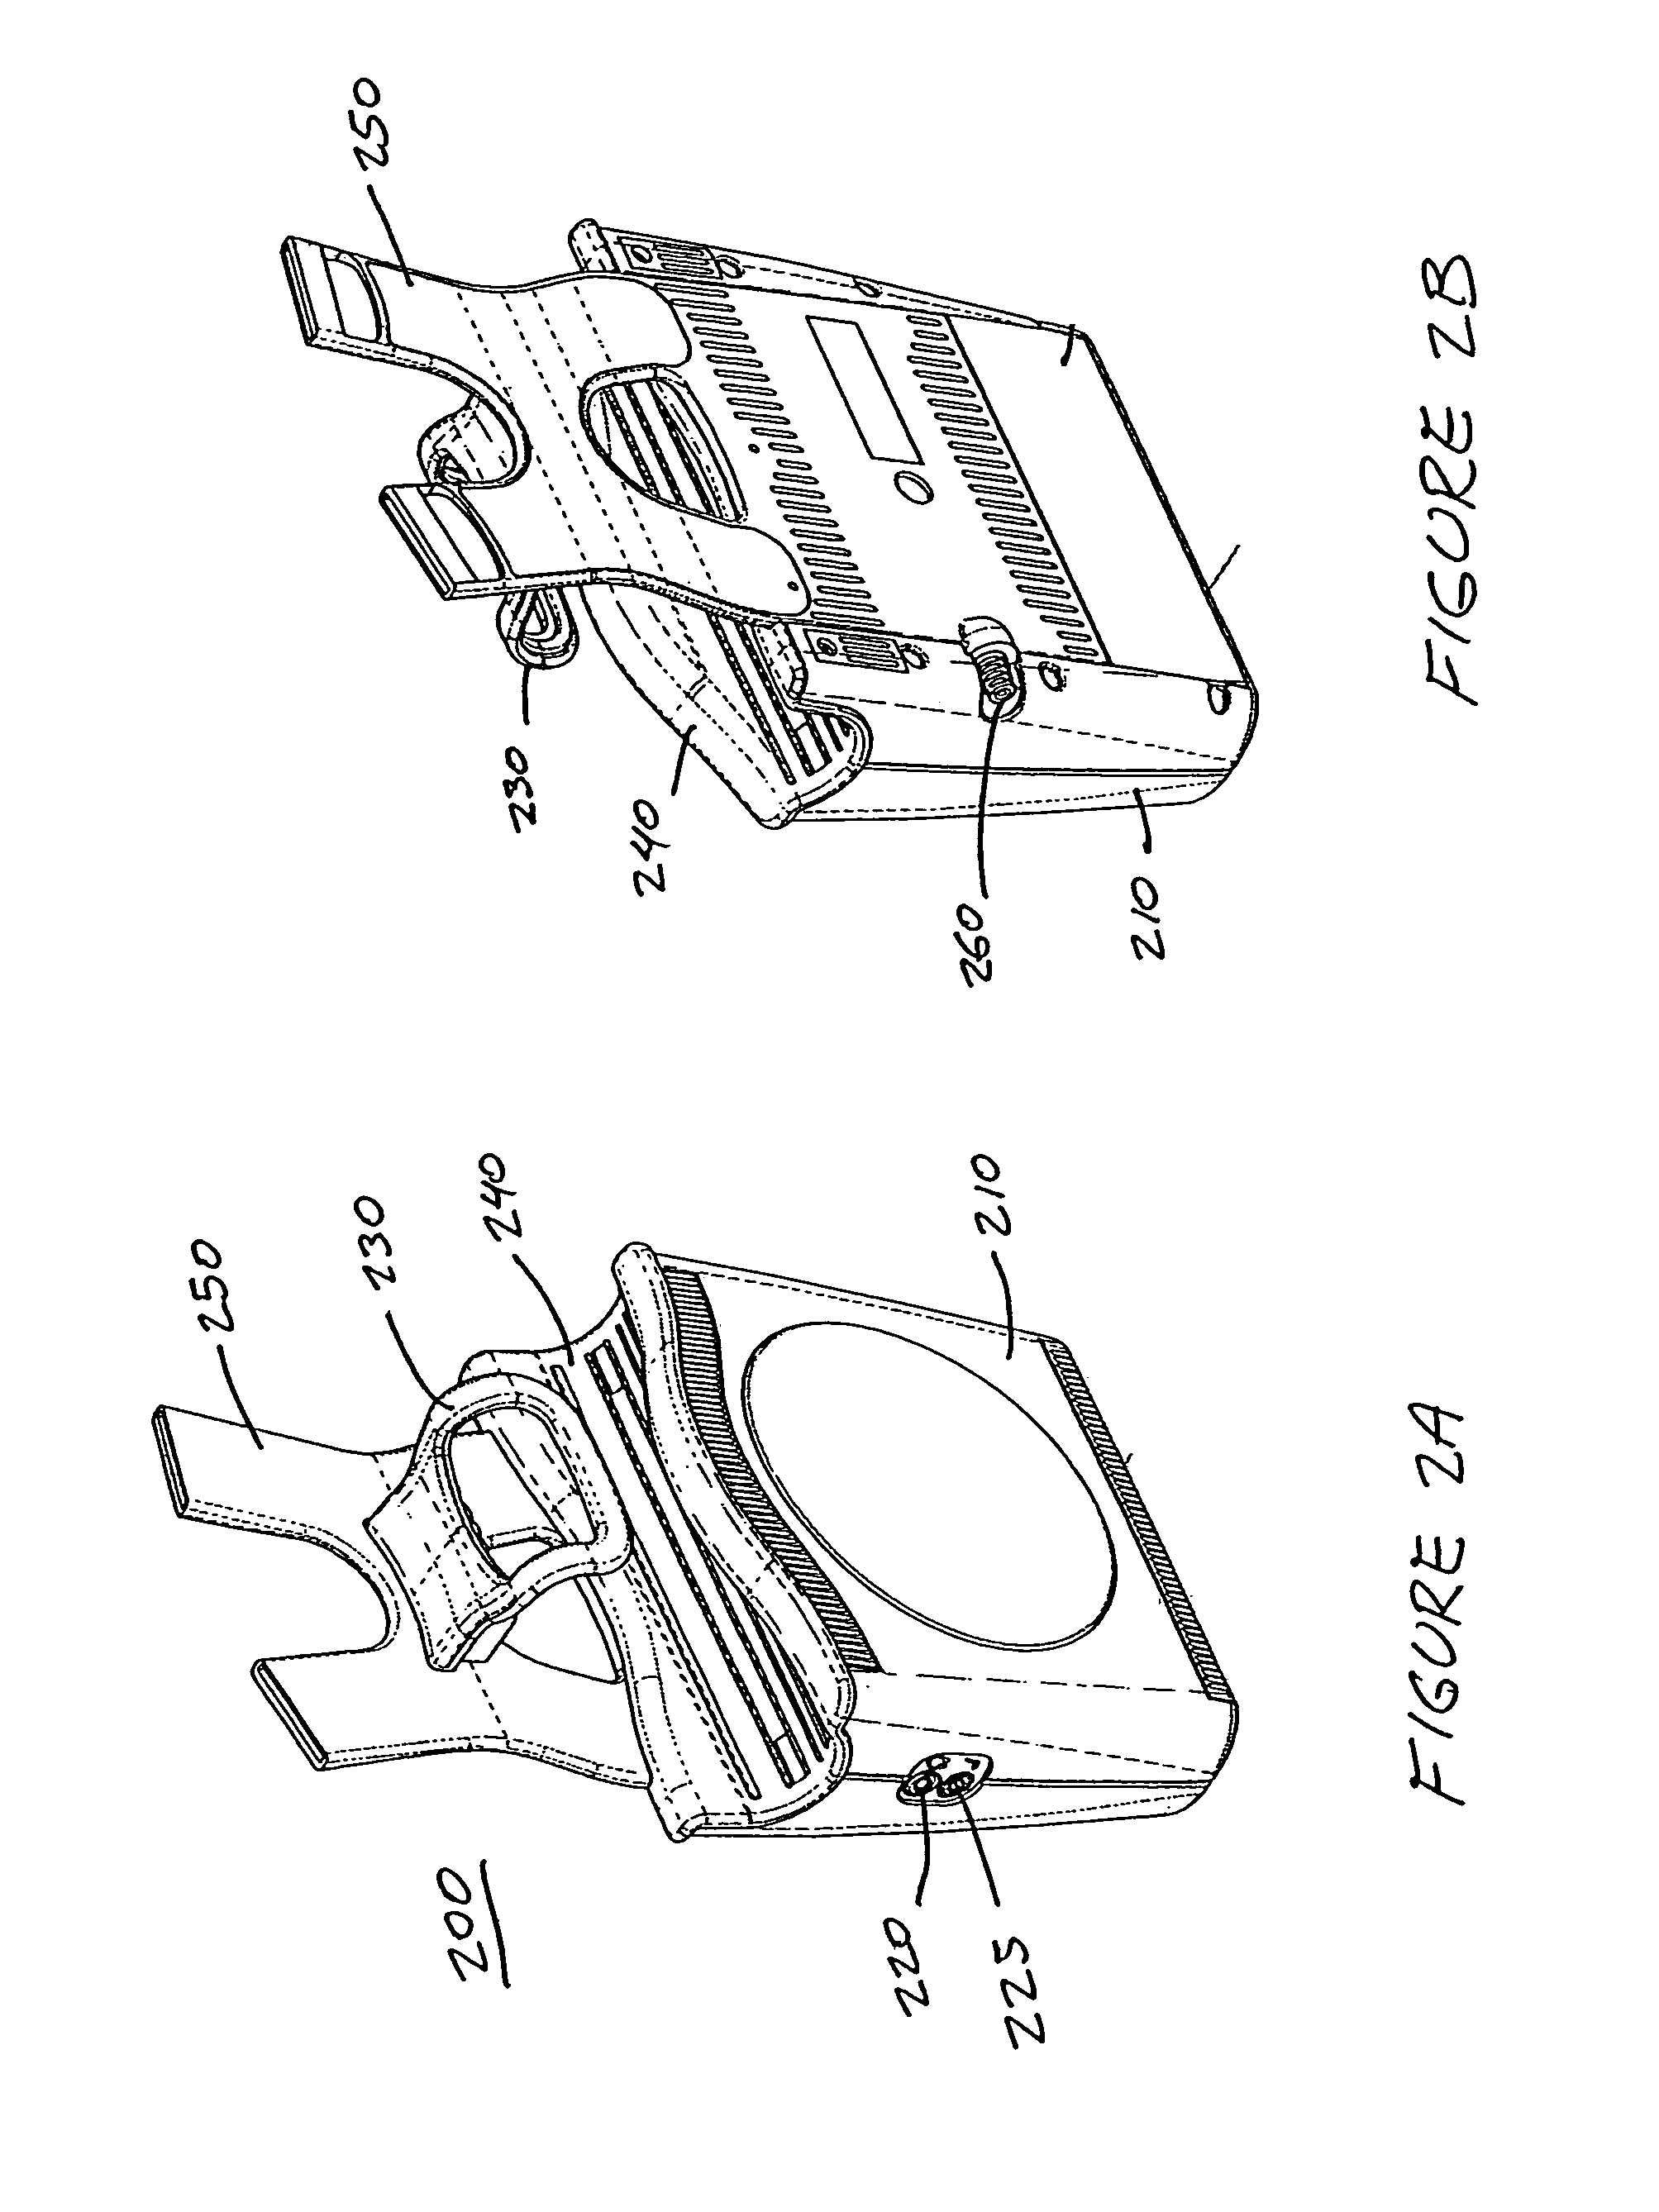 Methods and systems for operating a display facility or other public space